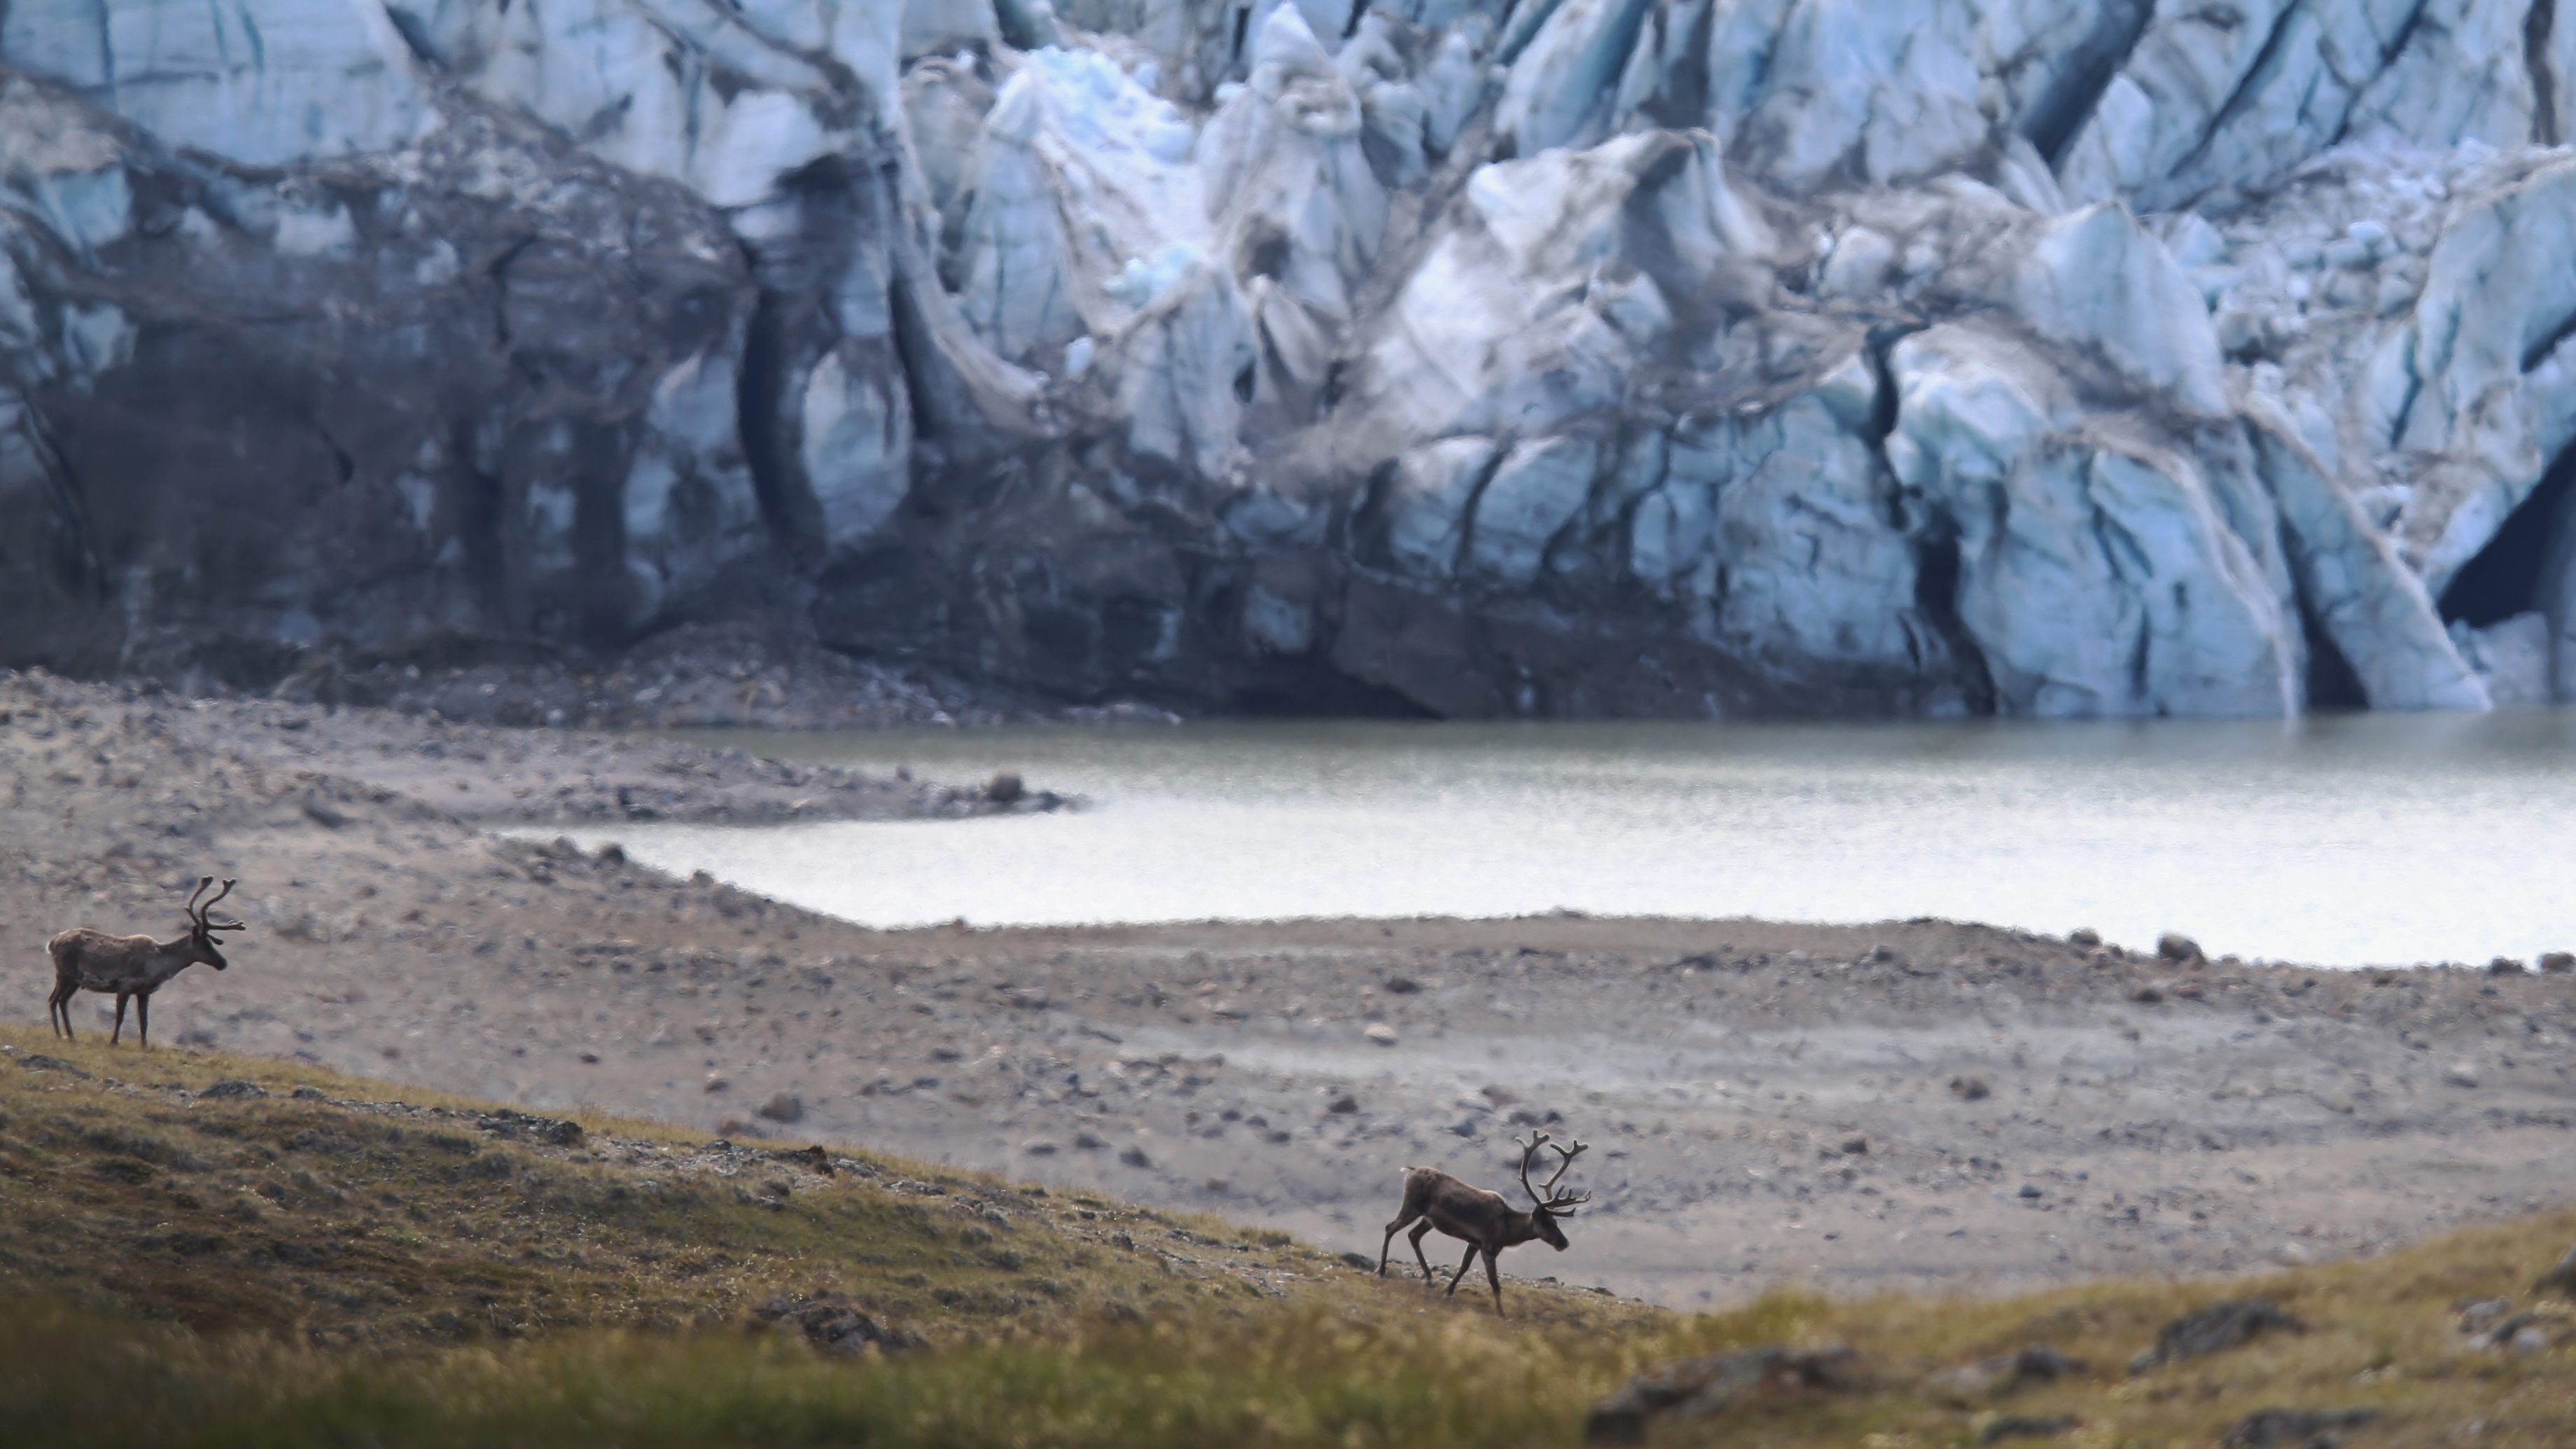 Two caribou walk down a grassy slope to a sandy beach next to a block of solid ice.